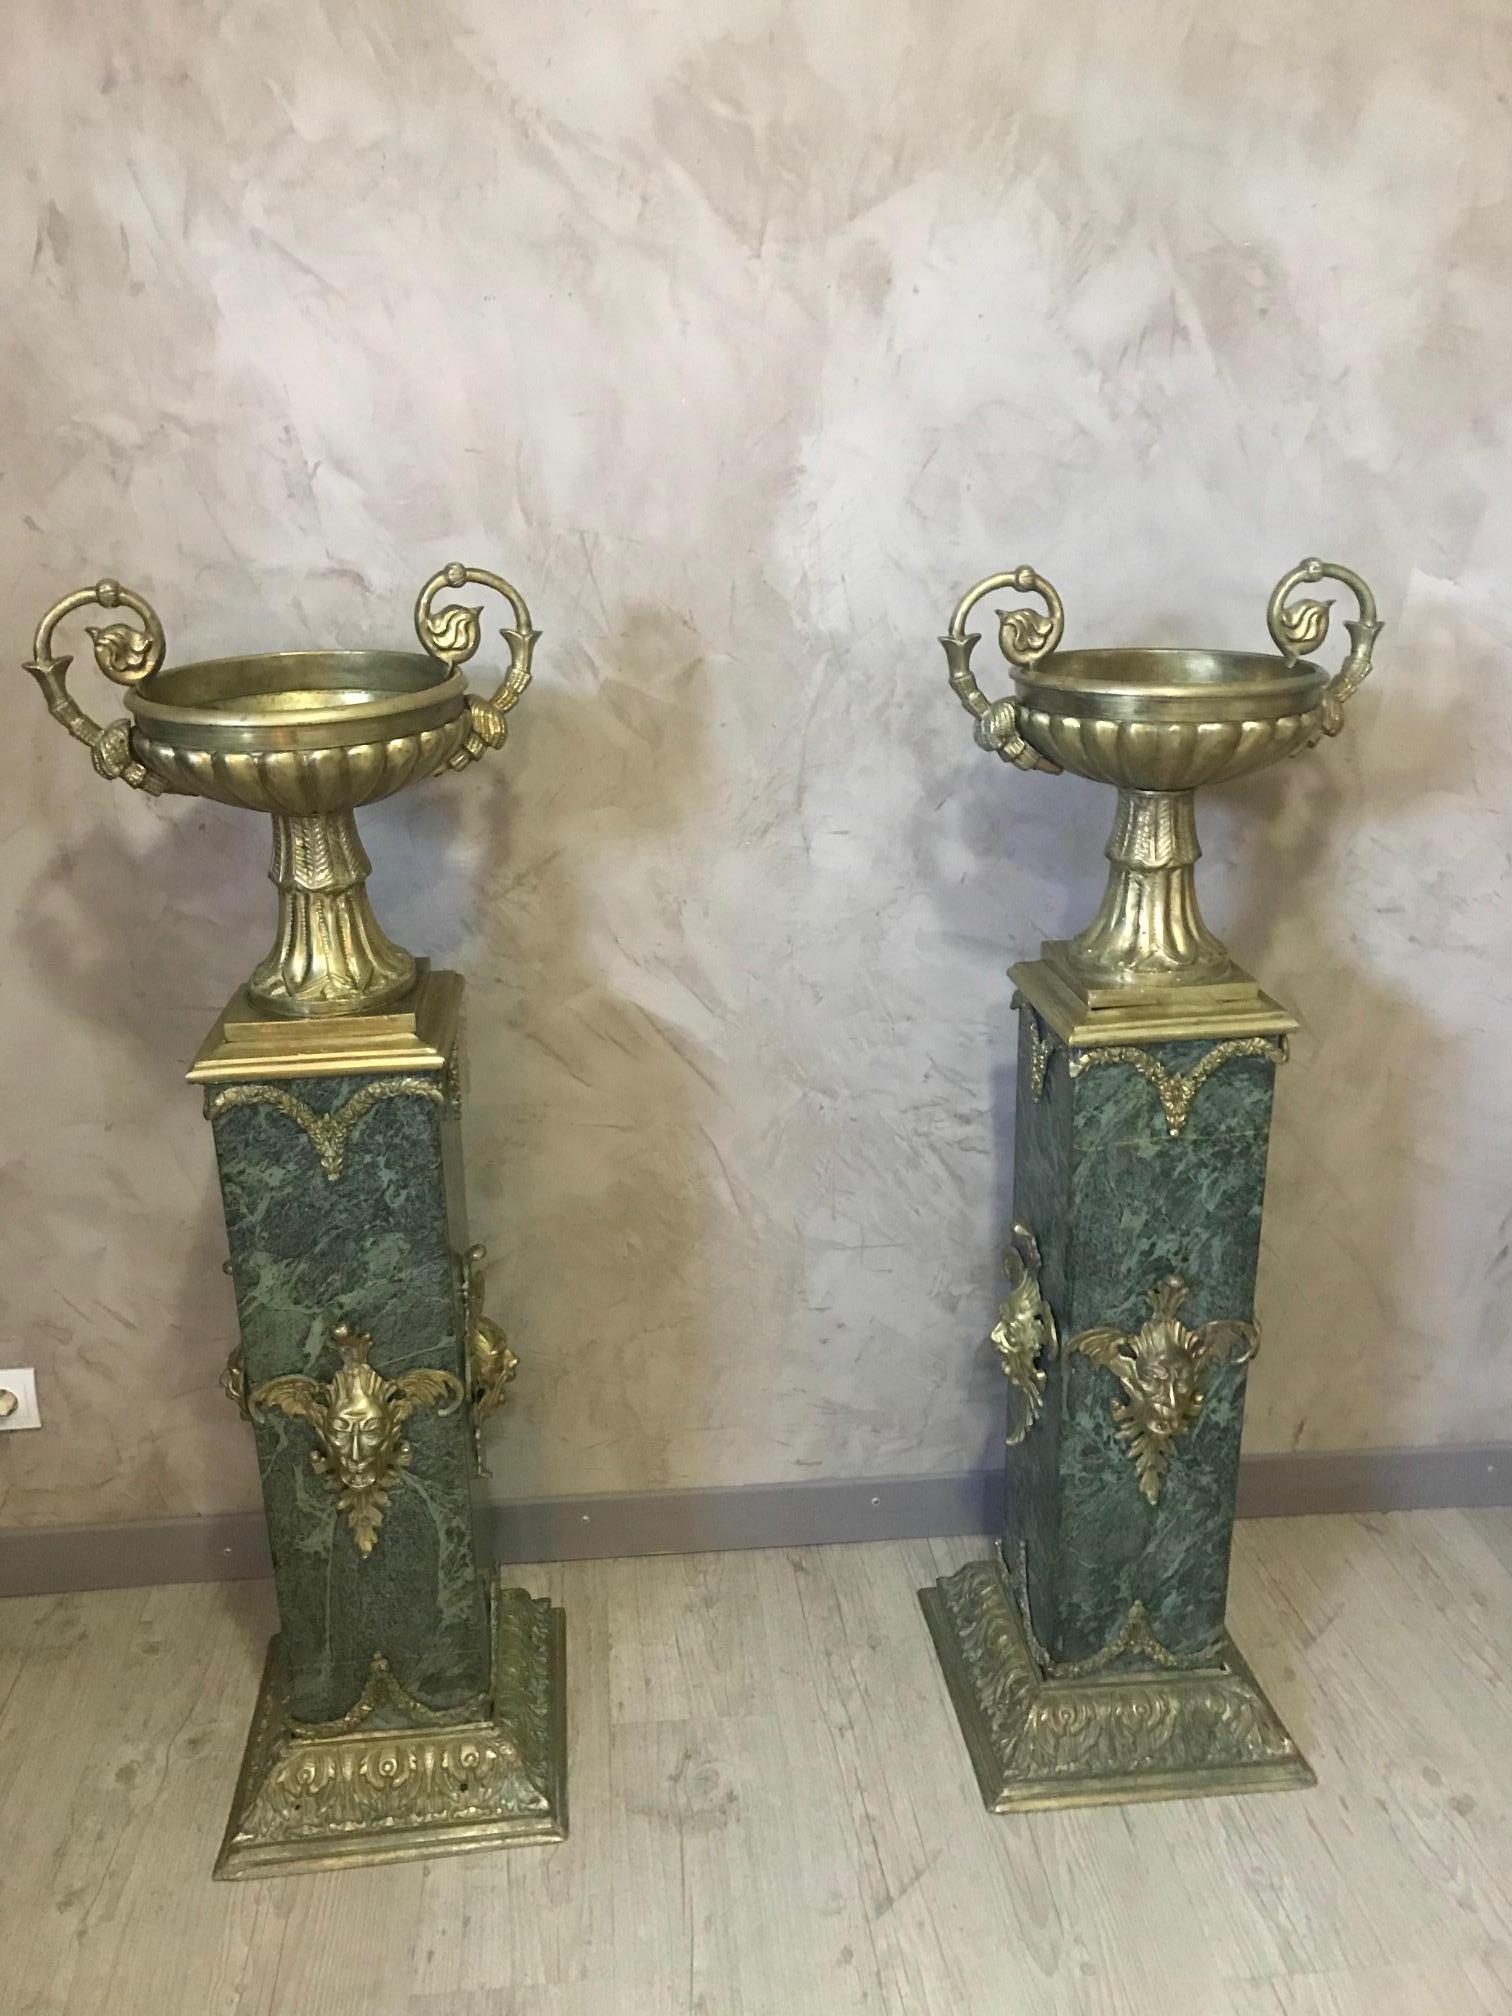 Beautiful and rare Empire style pair of Italian green marble and gilded bronze columns.
Napoleon III period. Bronze Medicis on the top removable thanks to a metal rod.
There are men's head on the green marble.
The base is also gilet bronze. There